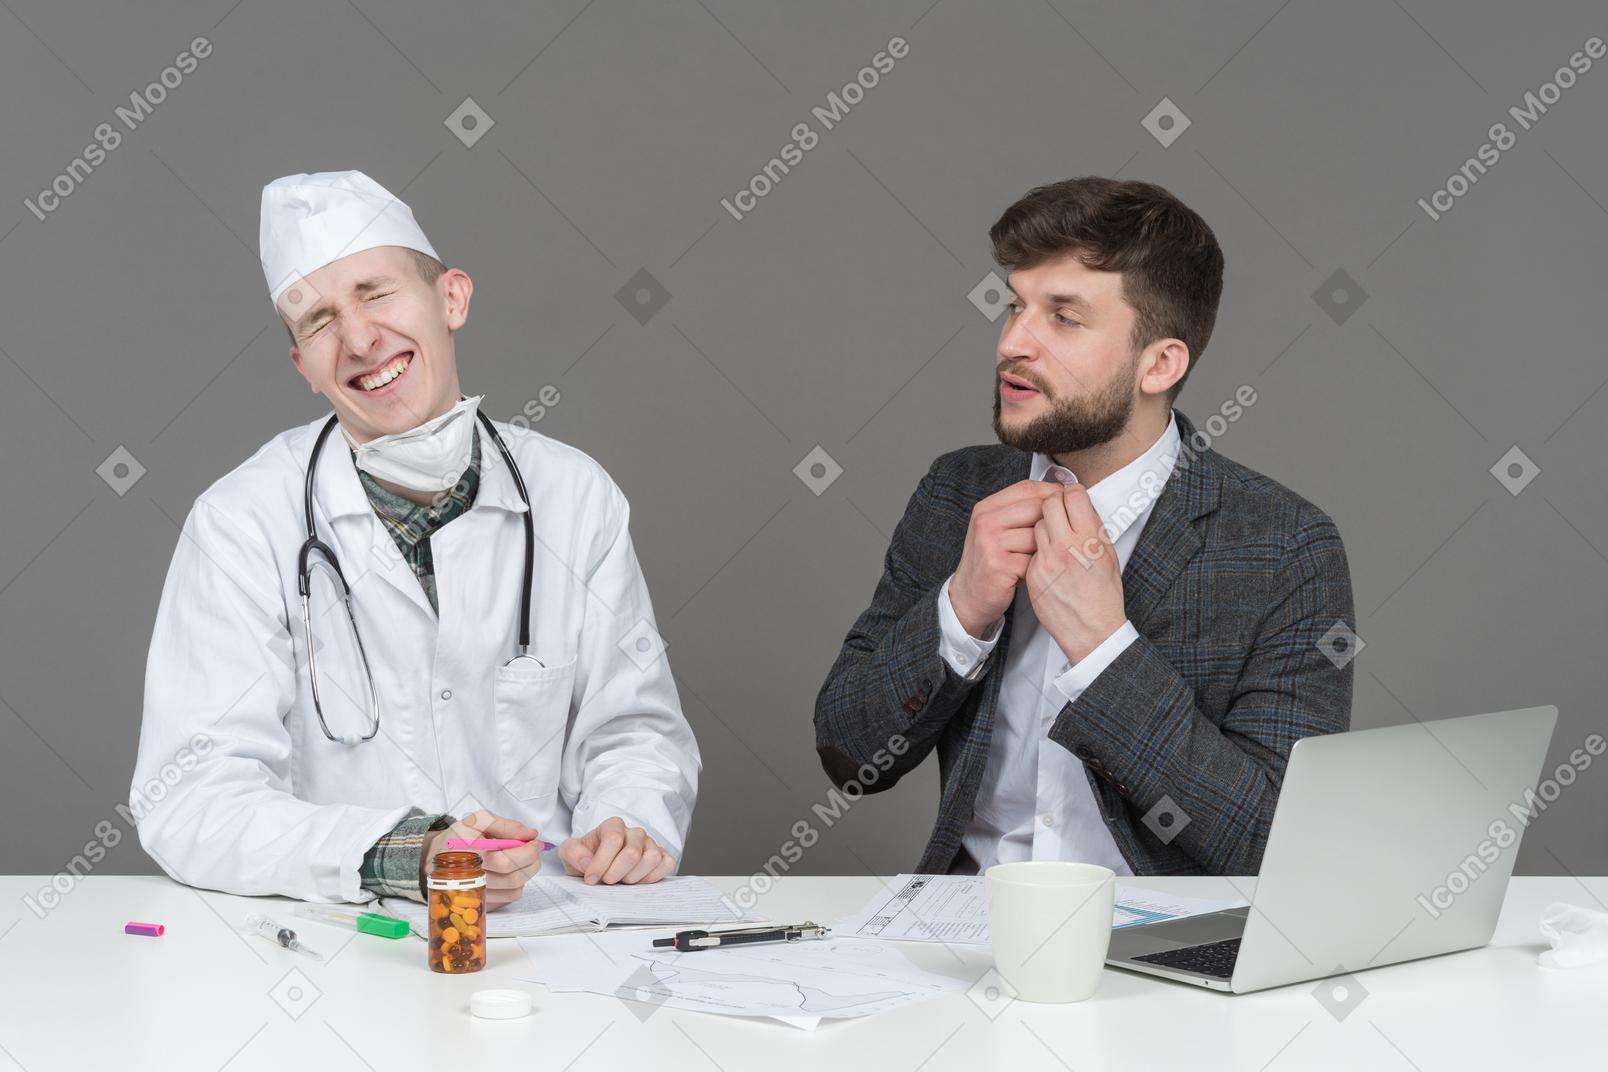 A doctor laughing with their patient